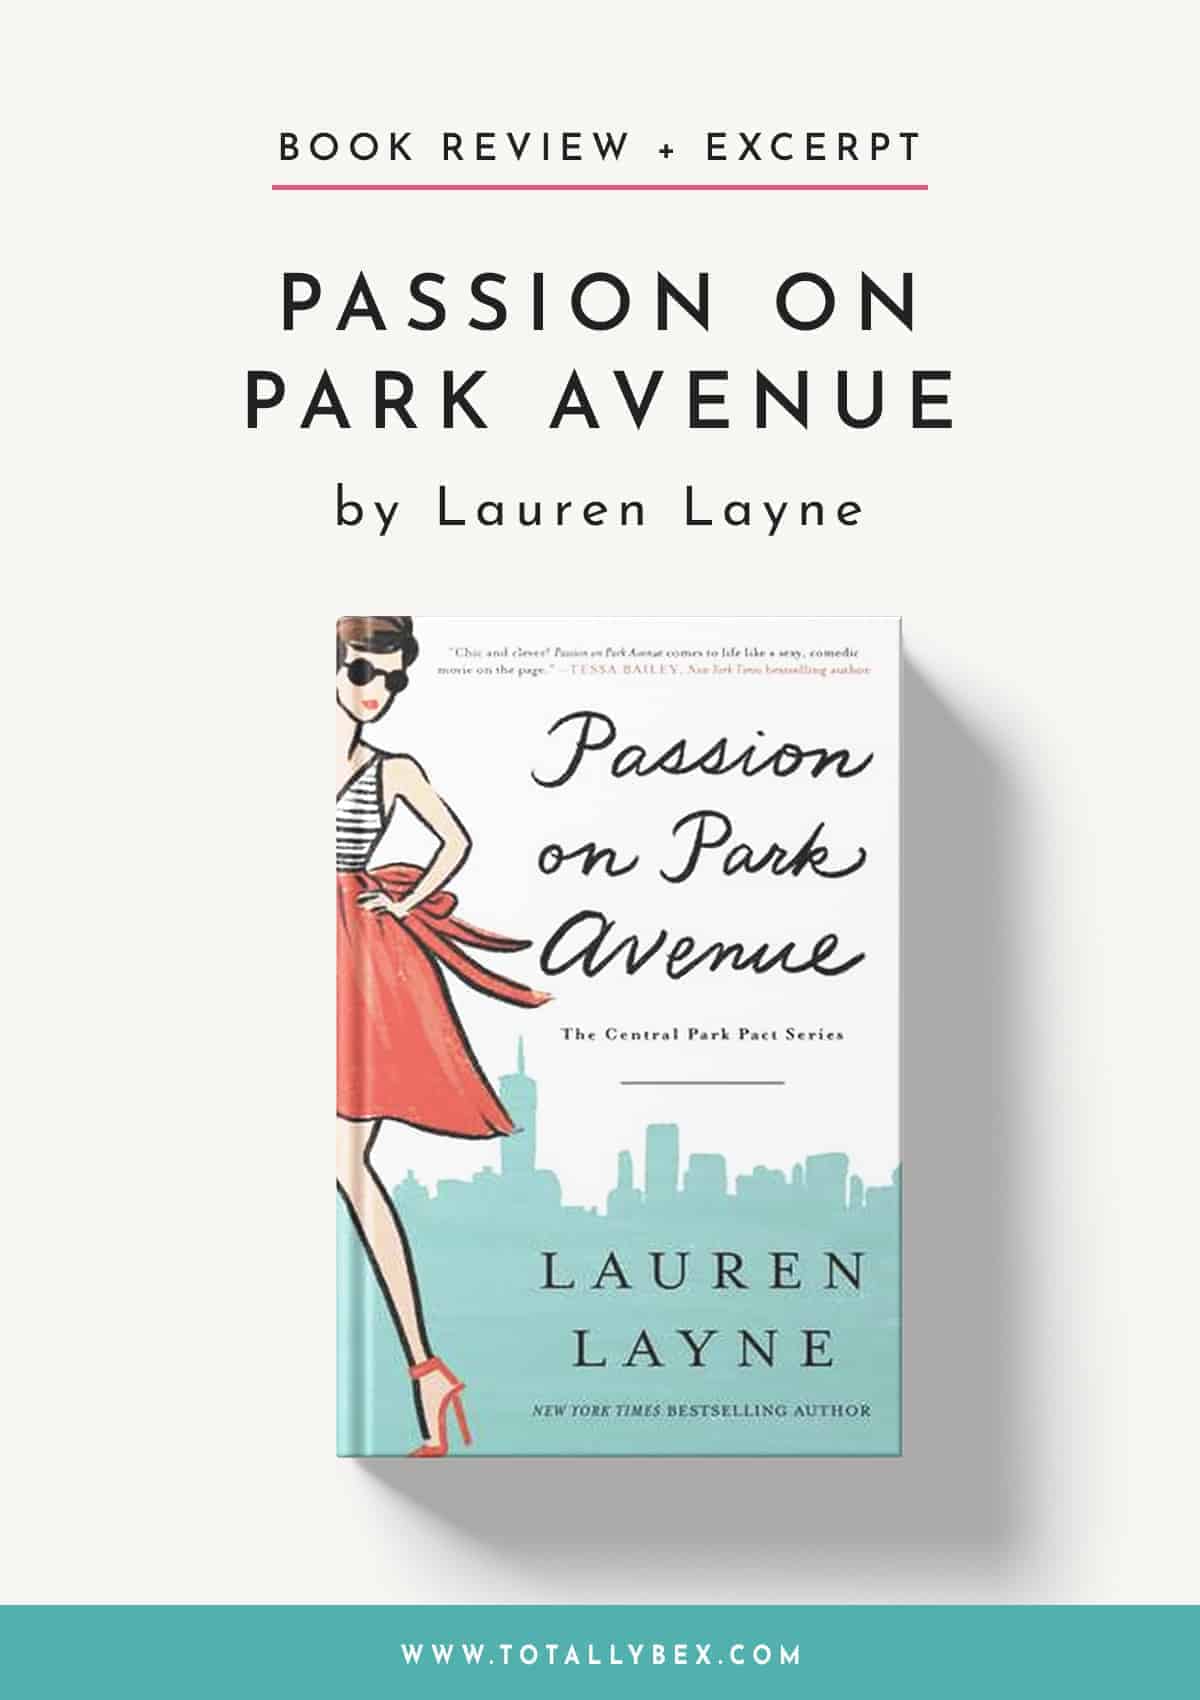 Passion on Park Avenue by Lauren Layne is the first book in the Central Park Pact series featuring a slow-burn enemies-to-lovers story with a strong heroine